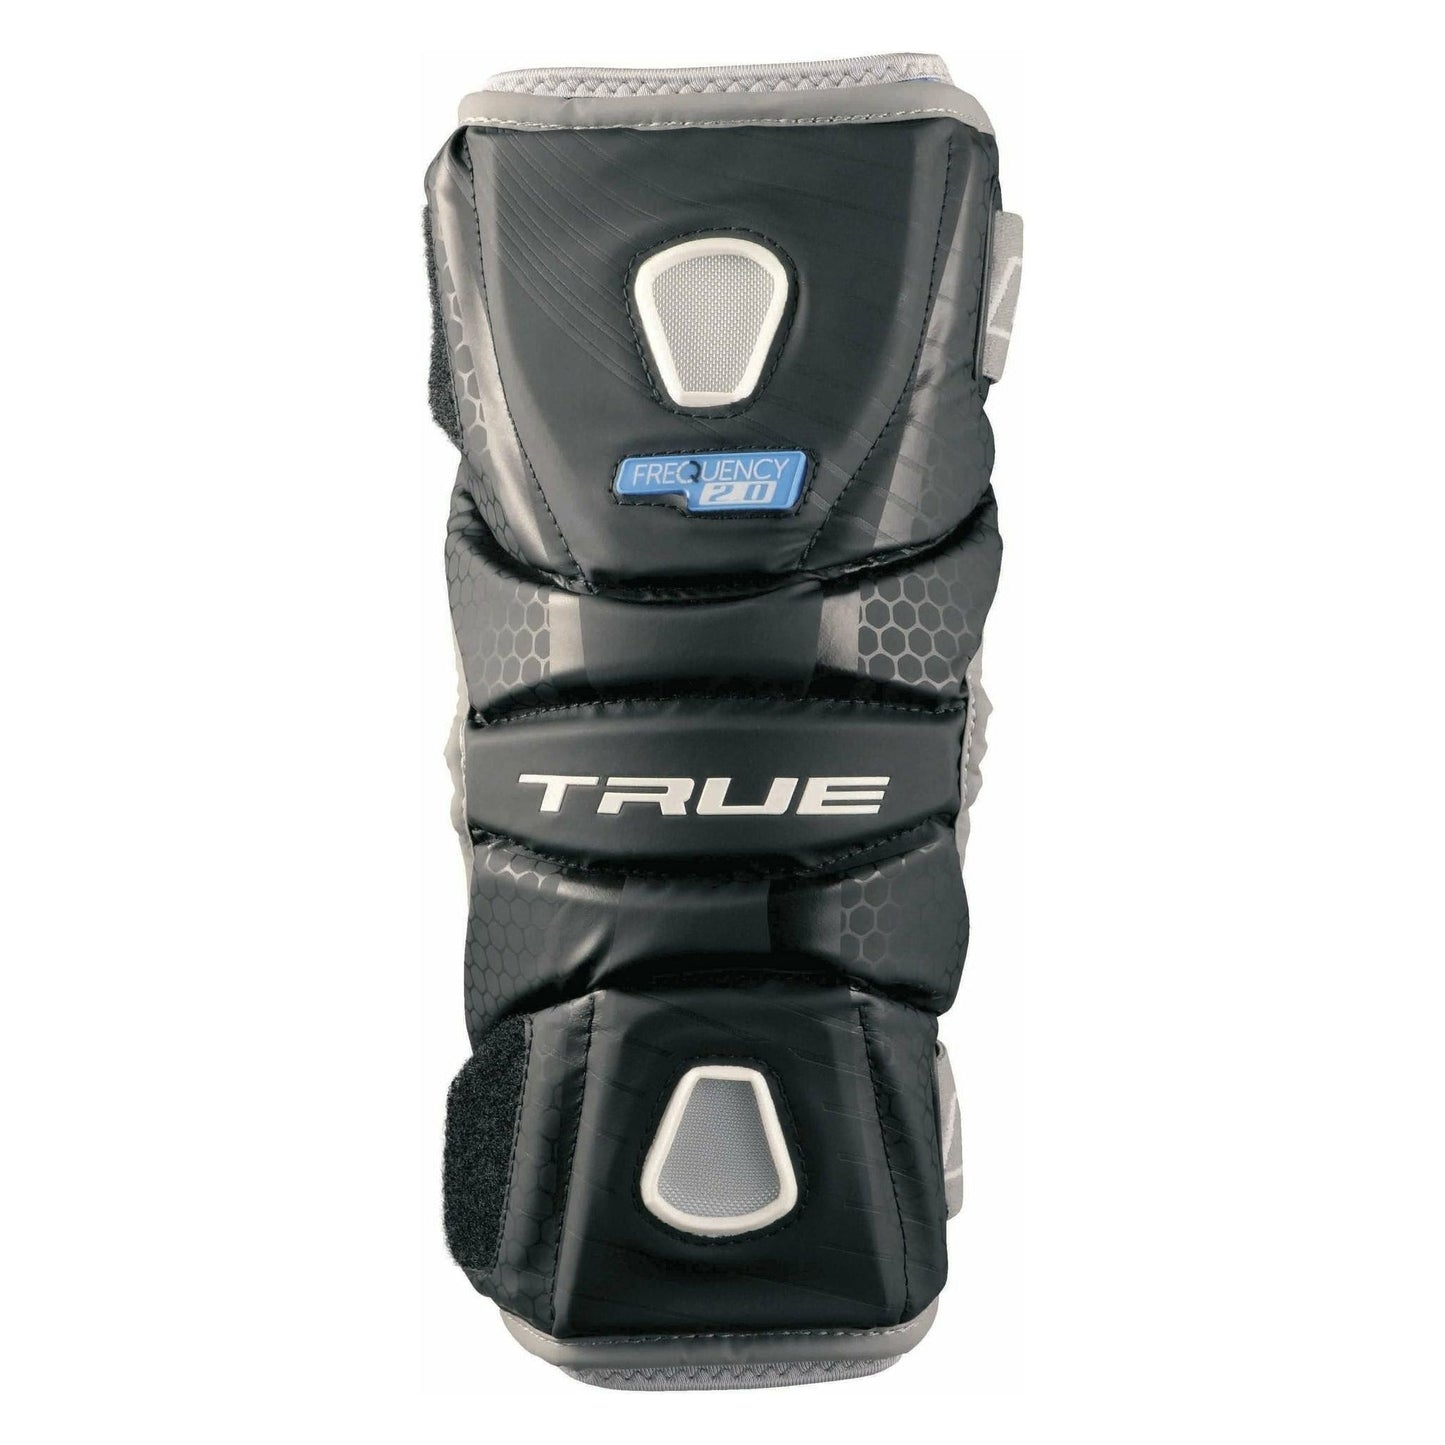 TRUE Frequency 2.0 Arm Pads